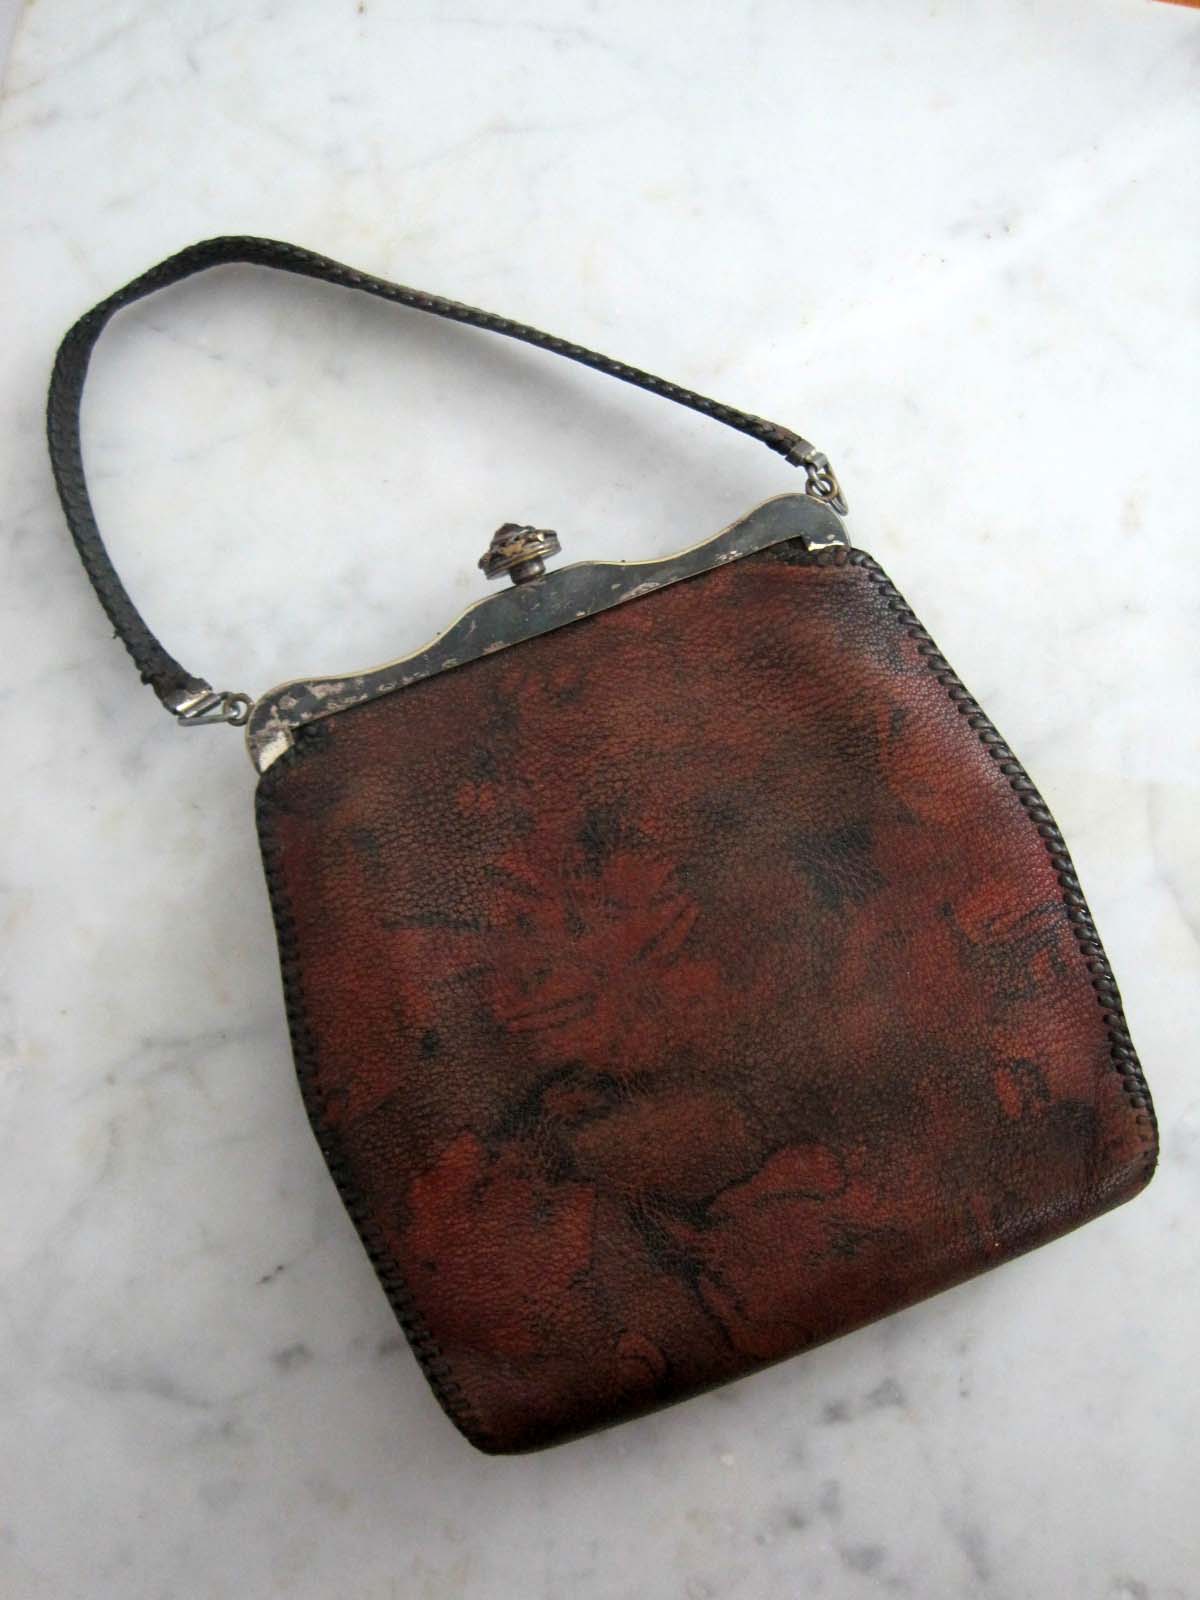 How to Dye Leather and Give Antique Look. Aged Leather Dyeing